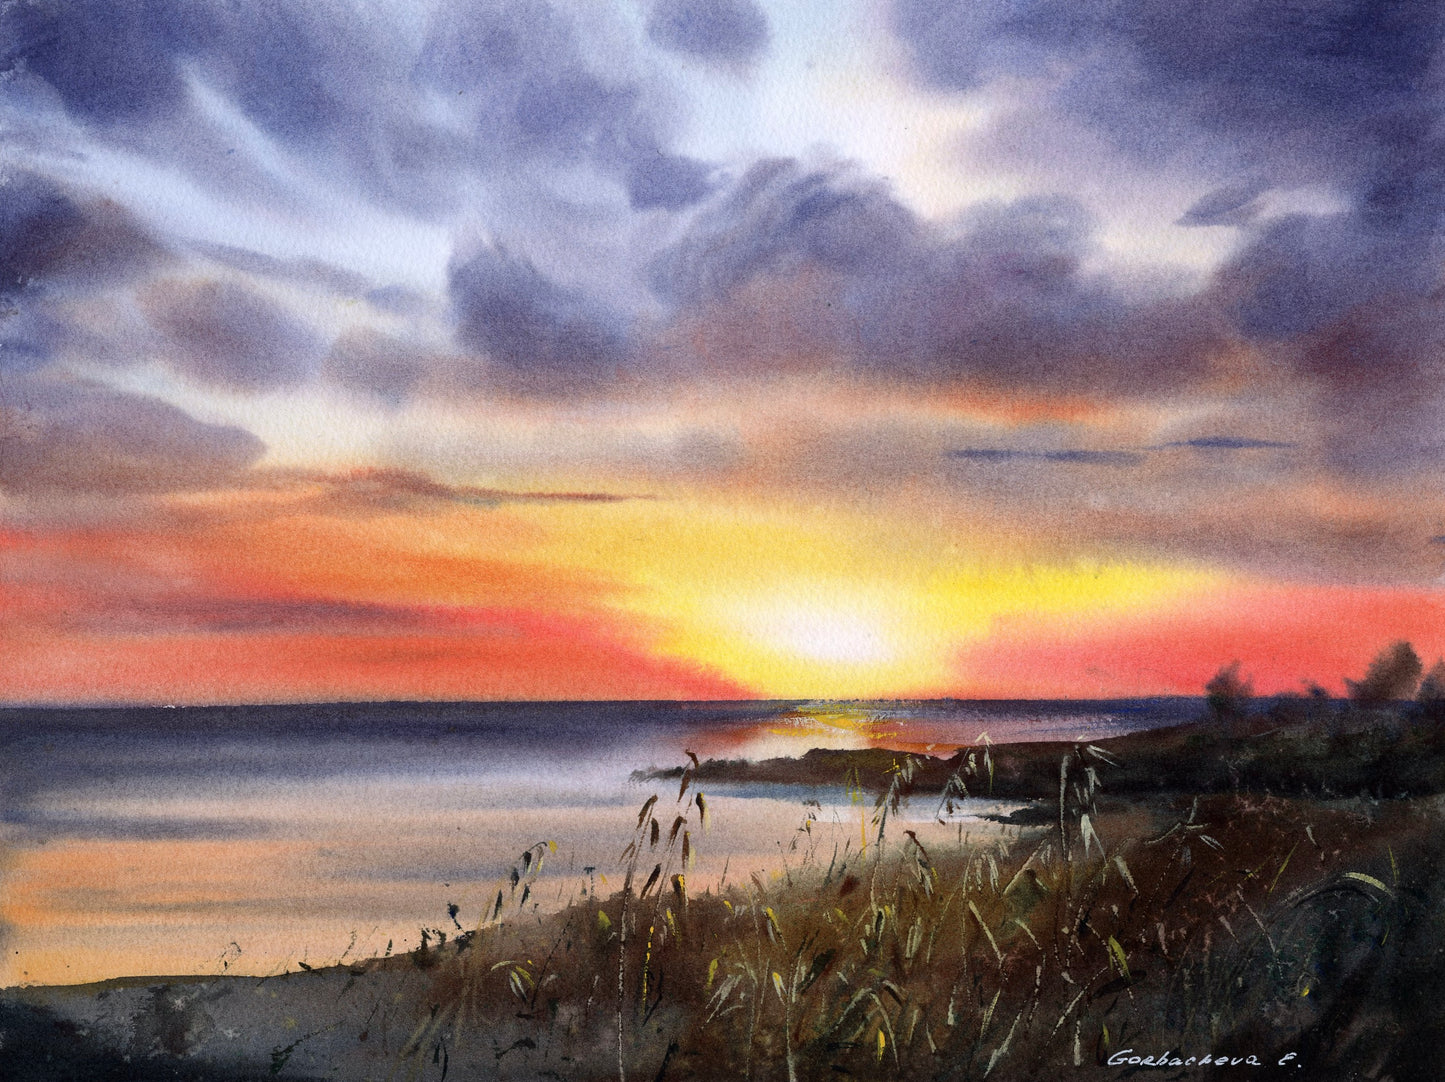 Original Watercolor Painting - 'Sunset on the Sea #15', Orange Sunset Cyprus View, Unique Home Decor Gift